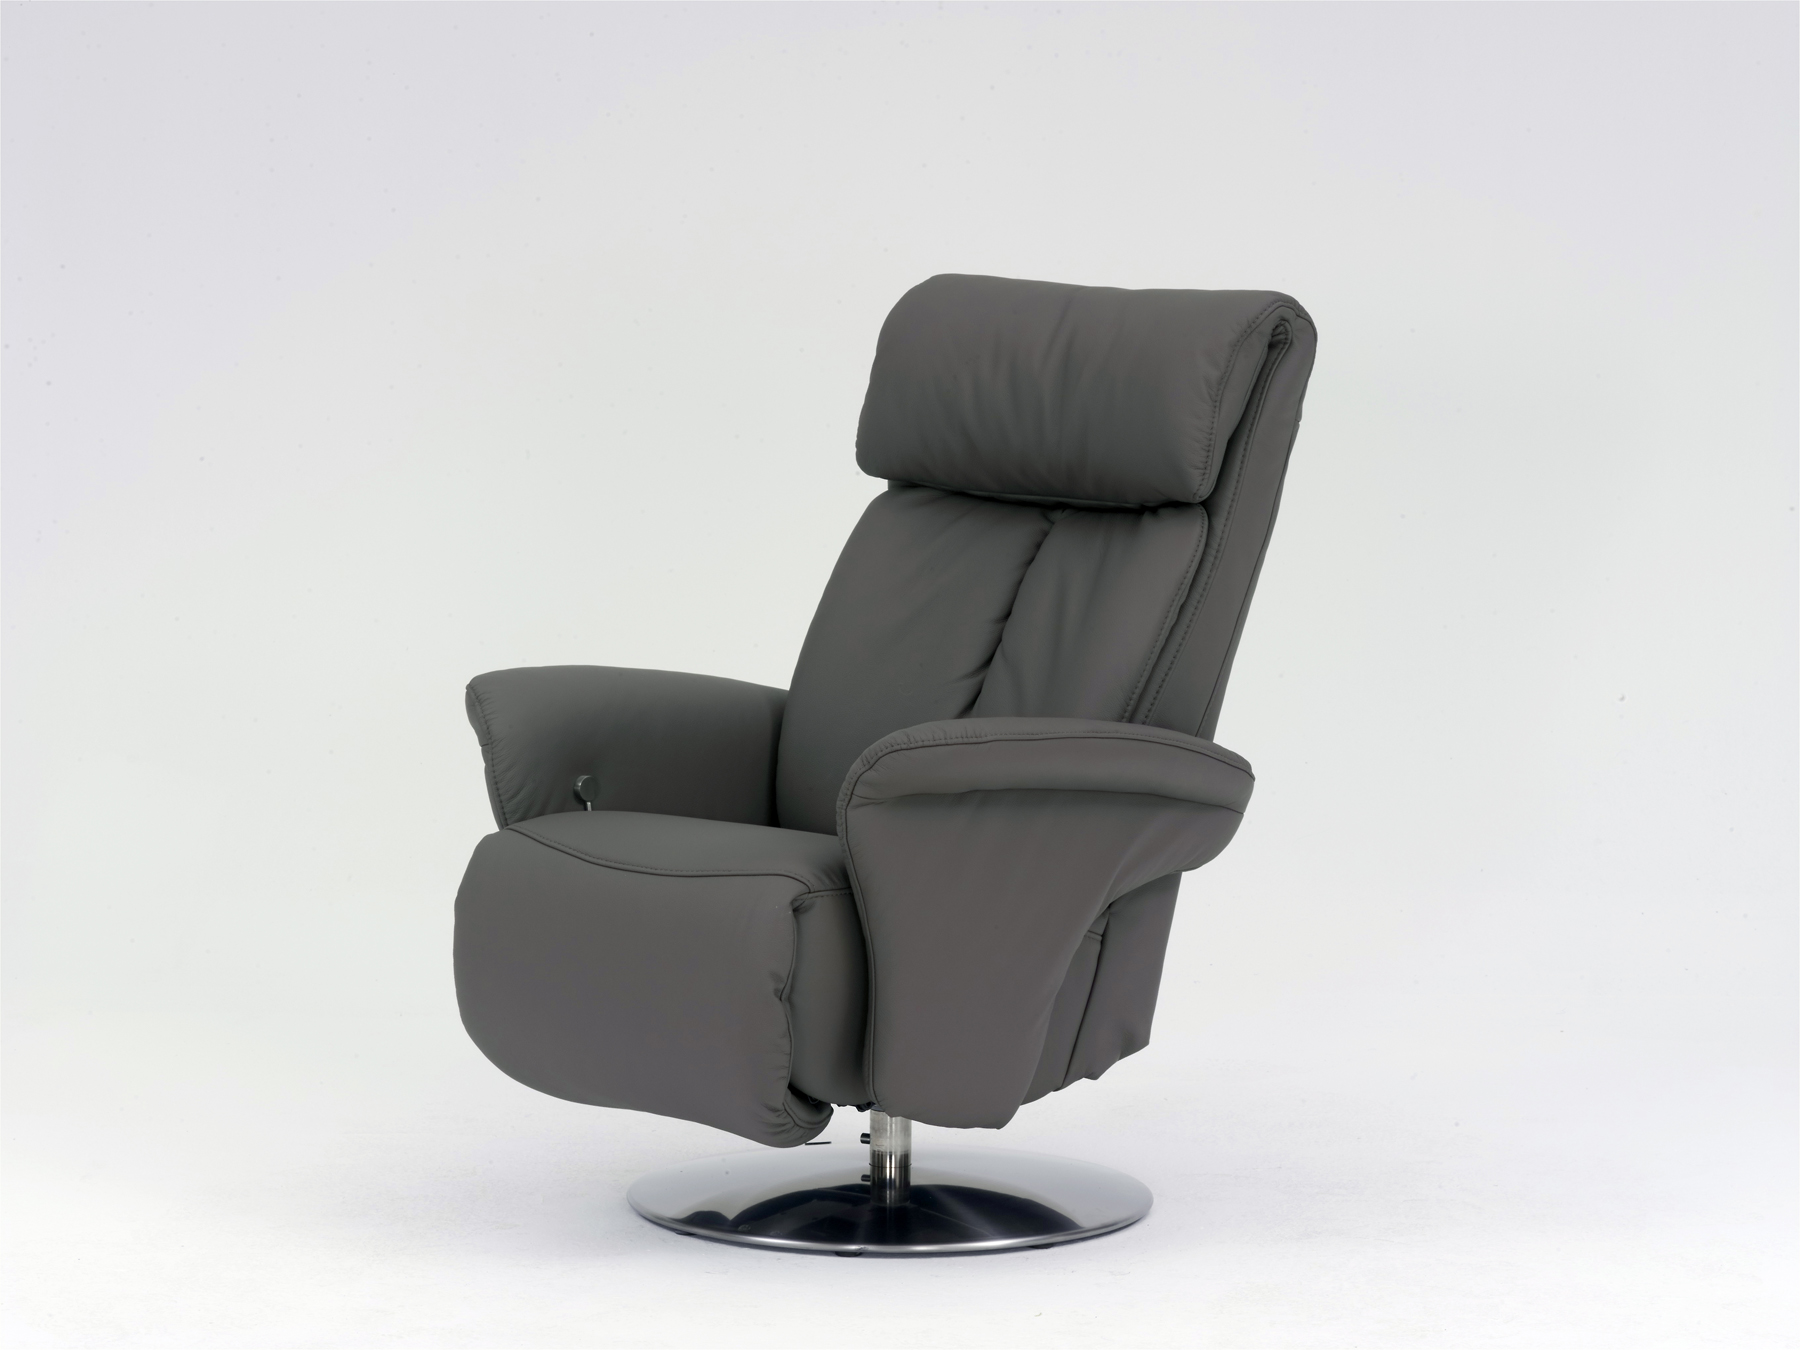 HIMOLLA SINARTRA GREY LEATHER CHAIR SIDE VIEW